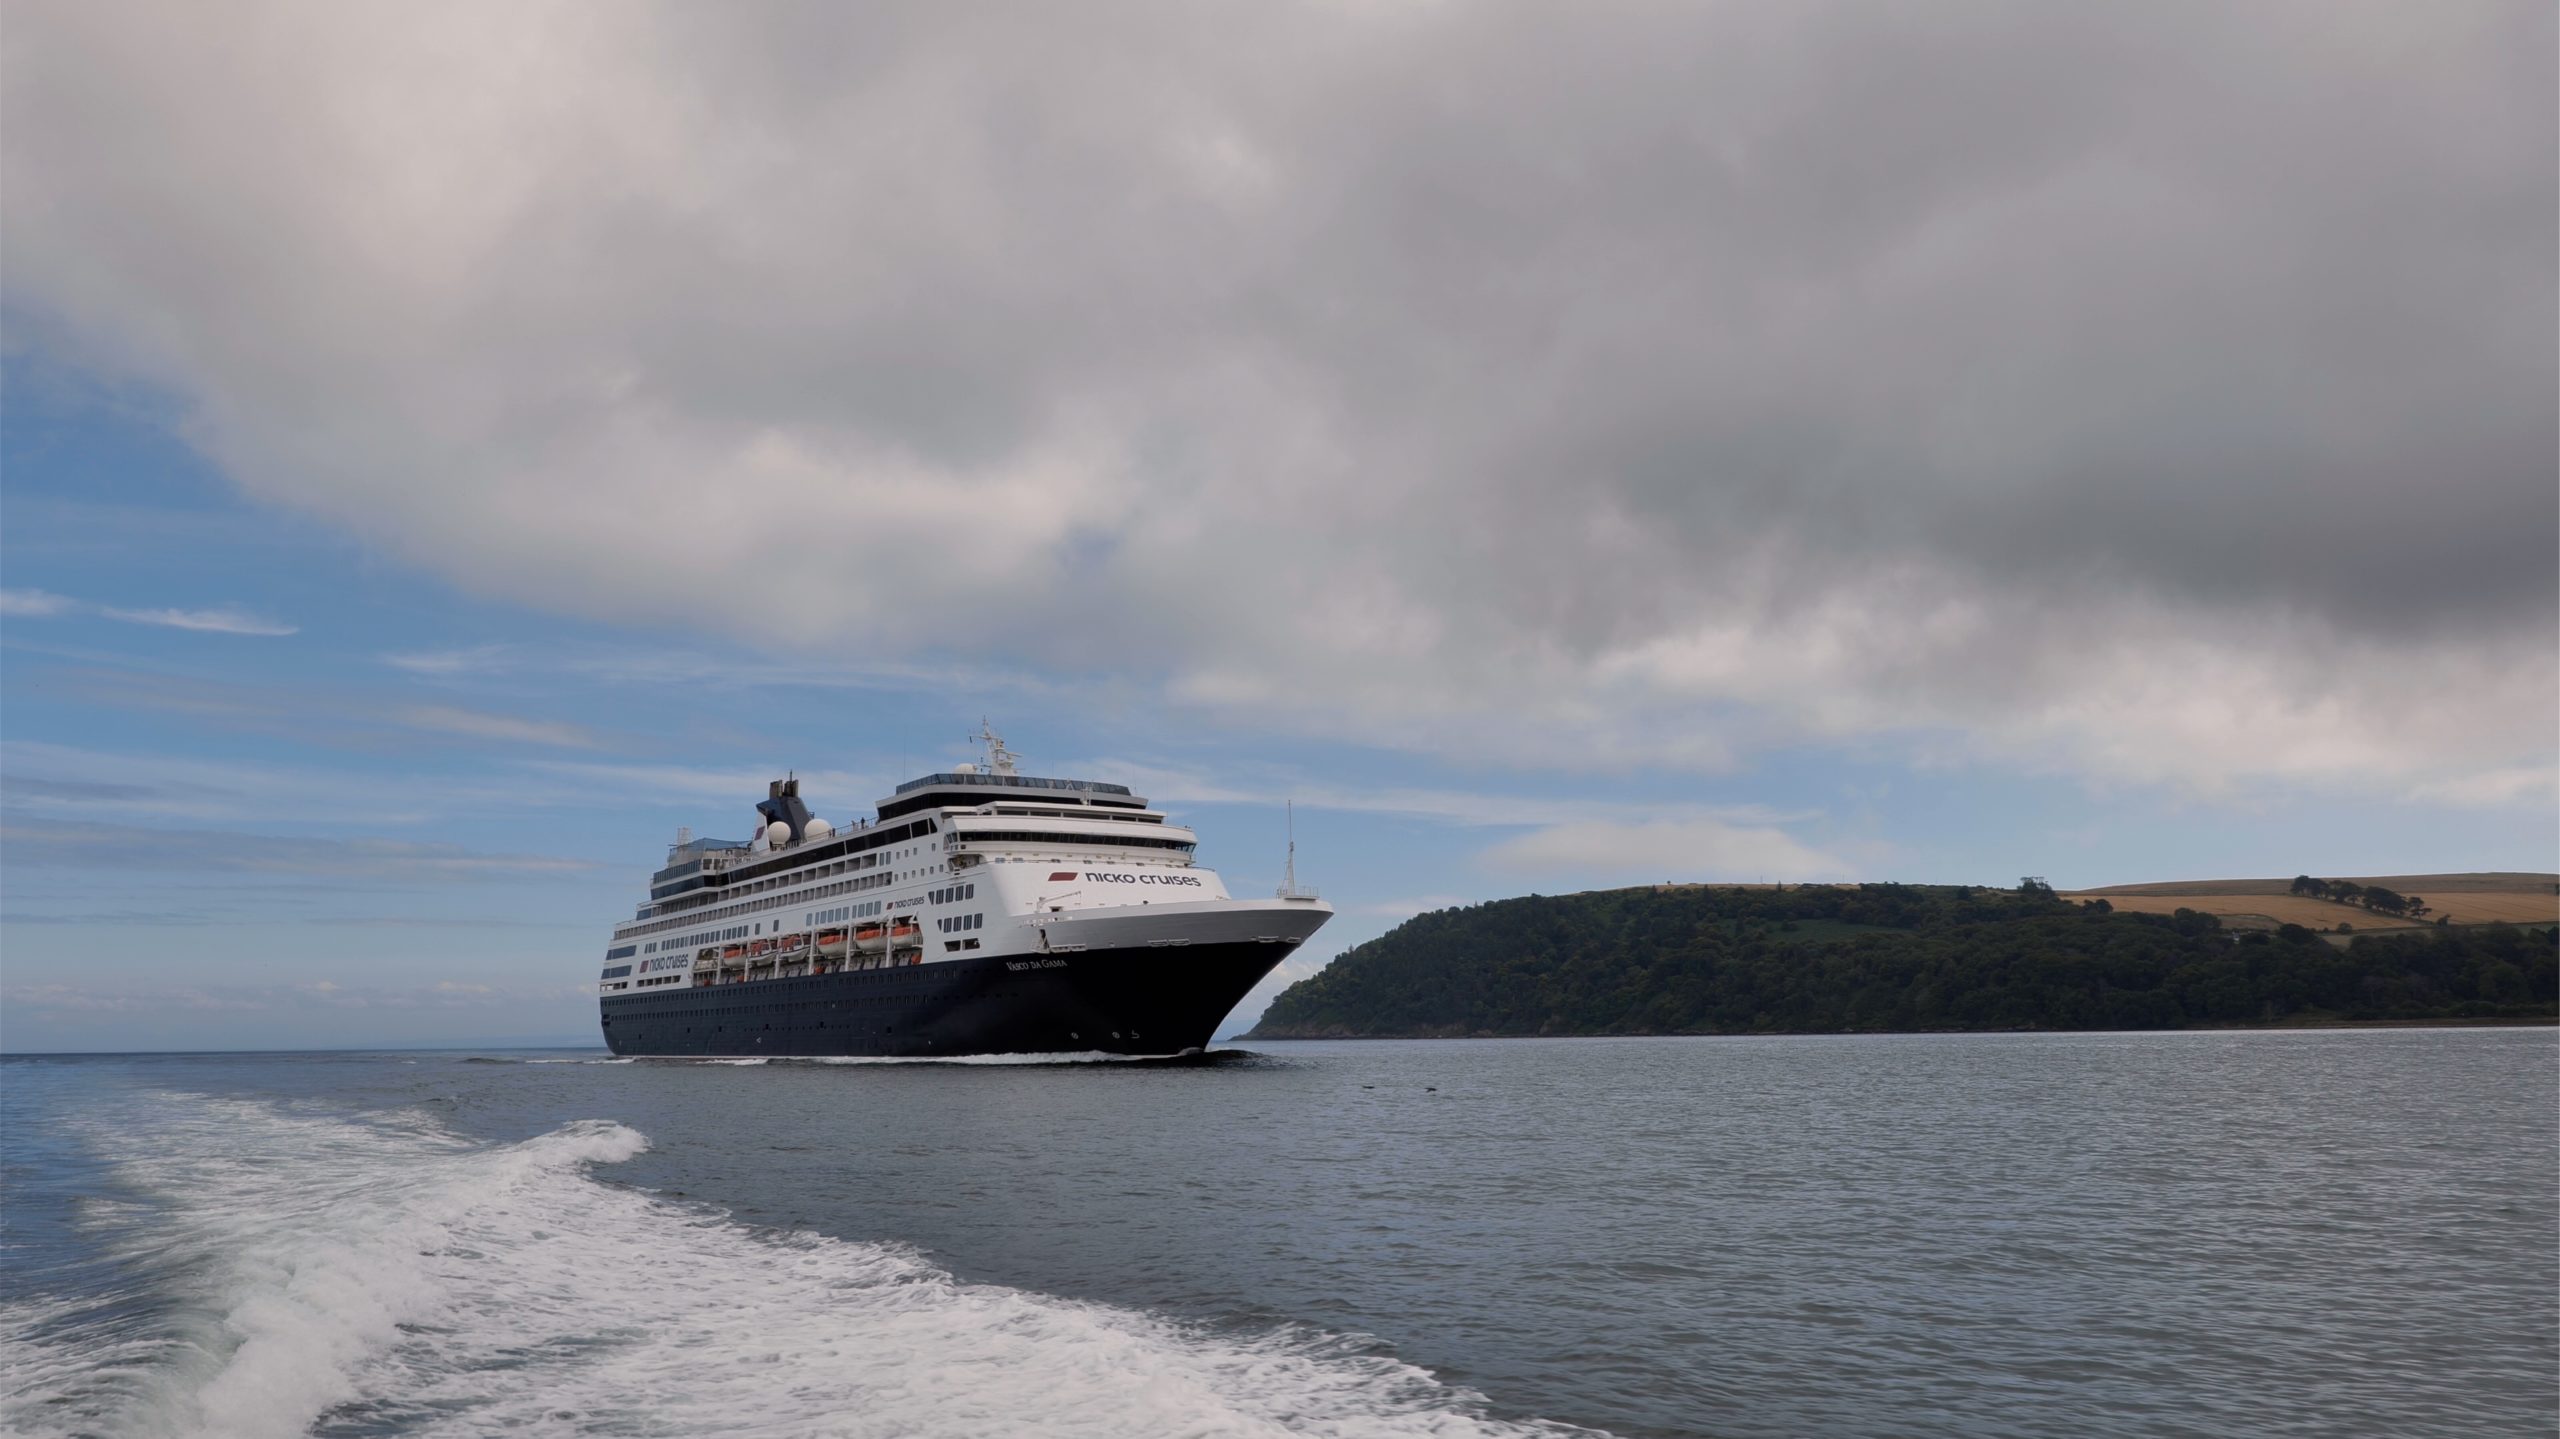 Cromarty Firth cruise ship calls hit a new record as industry bounces back after pandemic